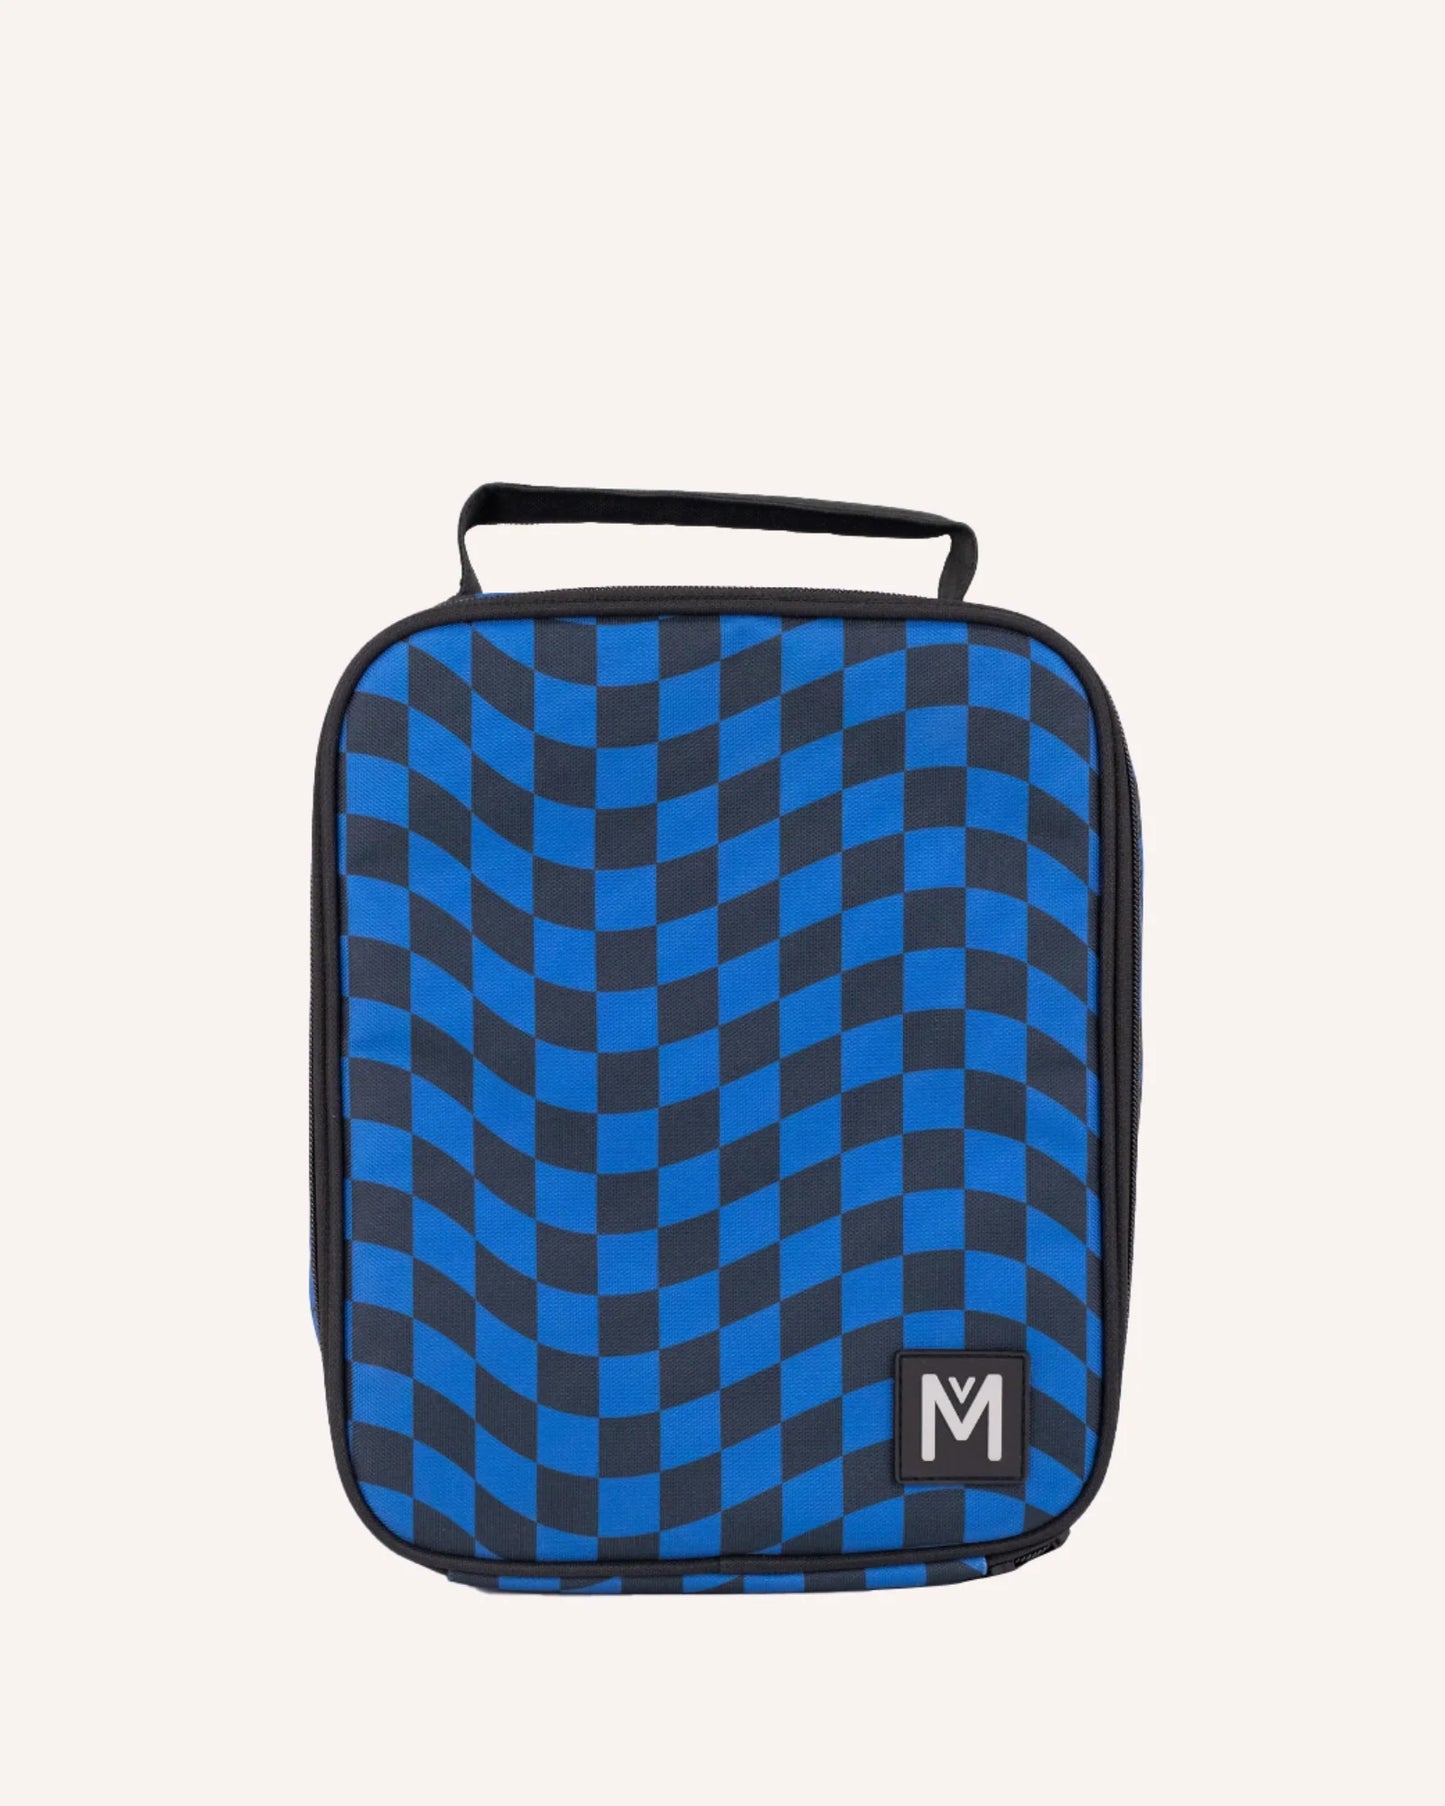 Insulated Lunch Bag Retro Check